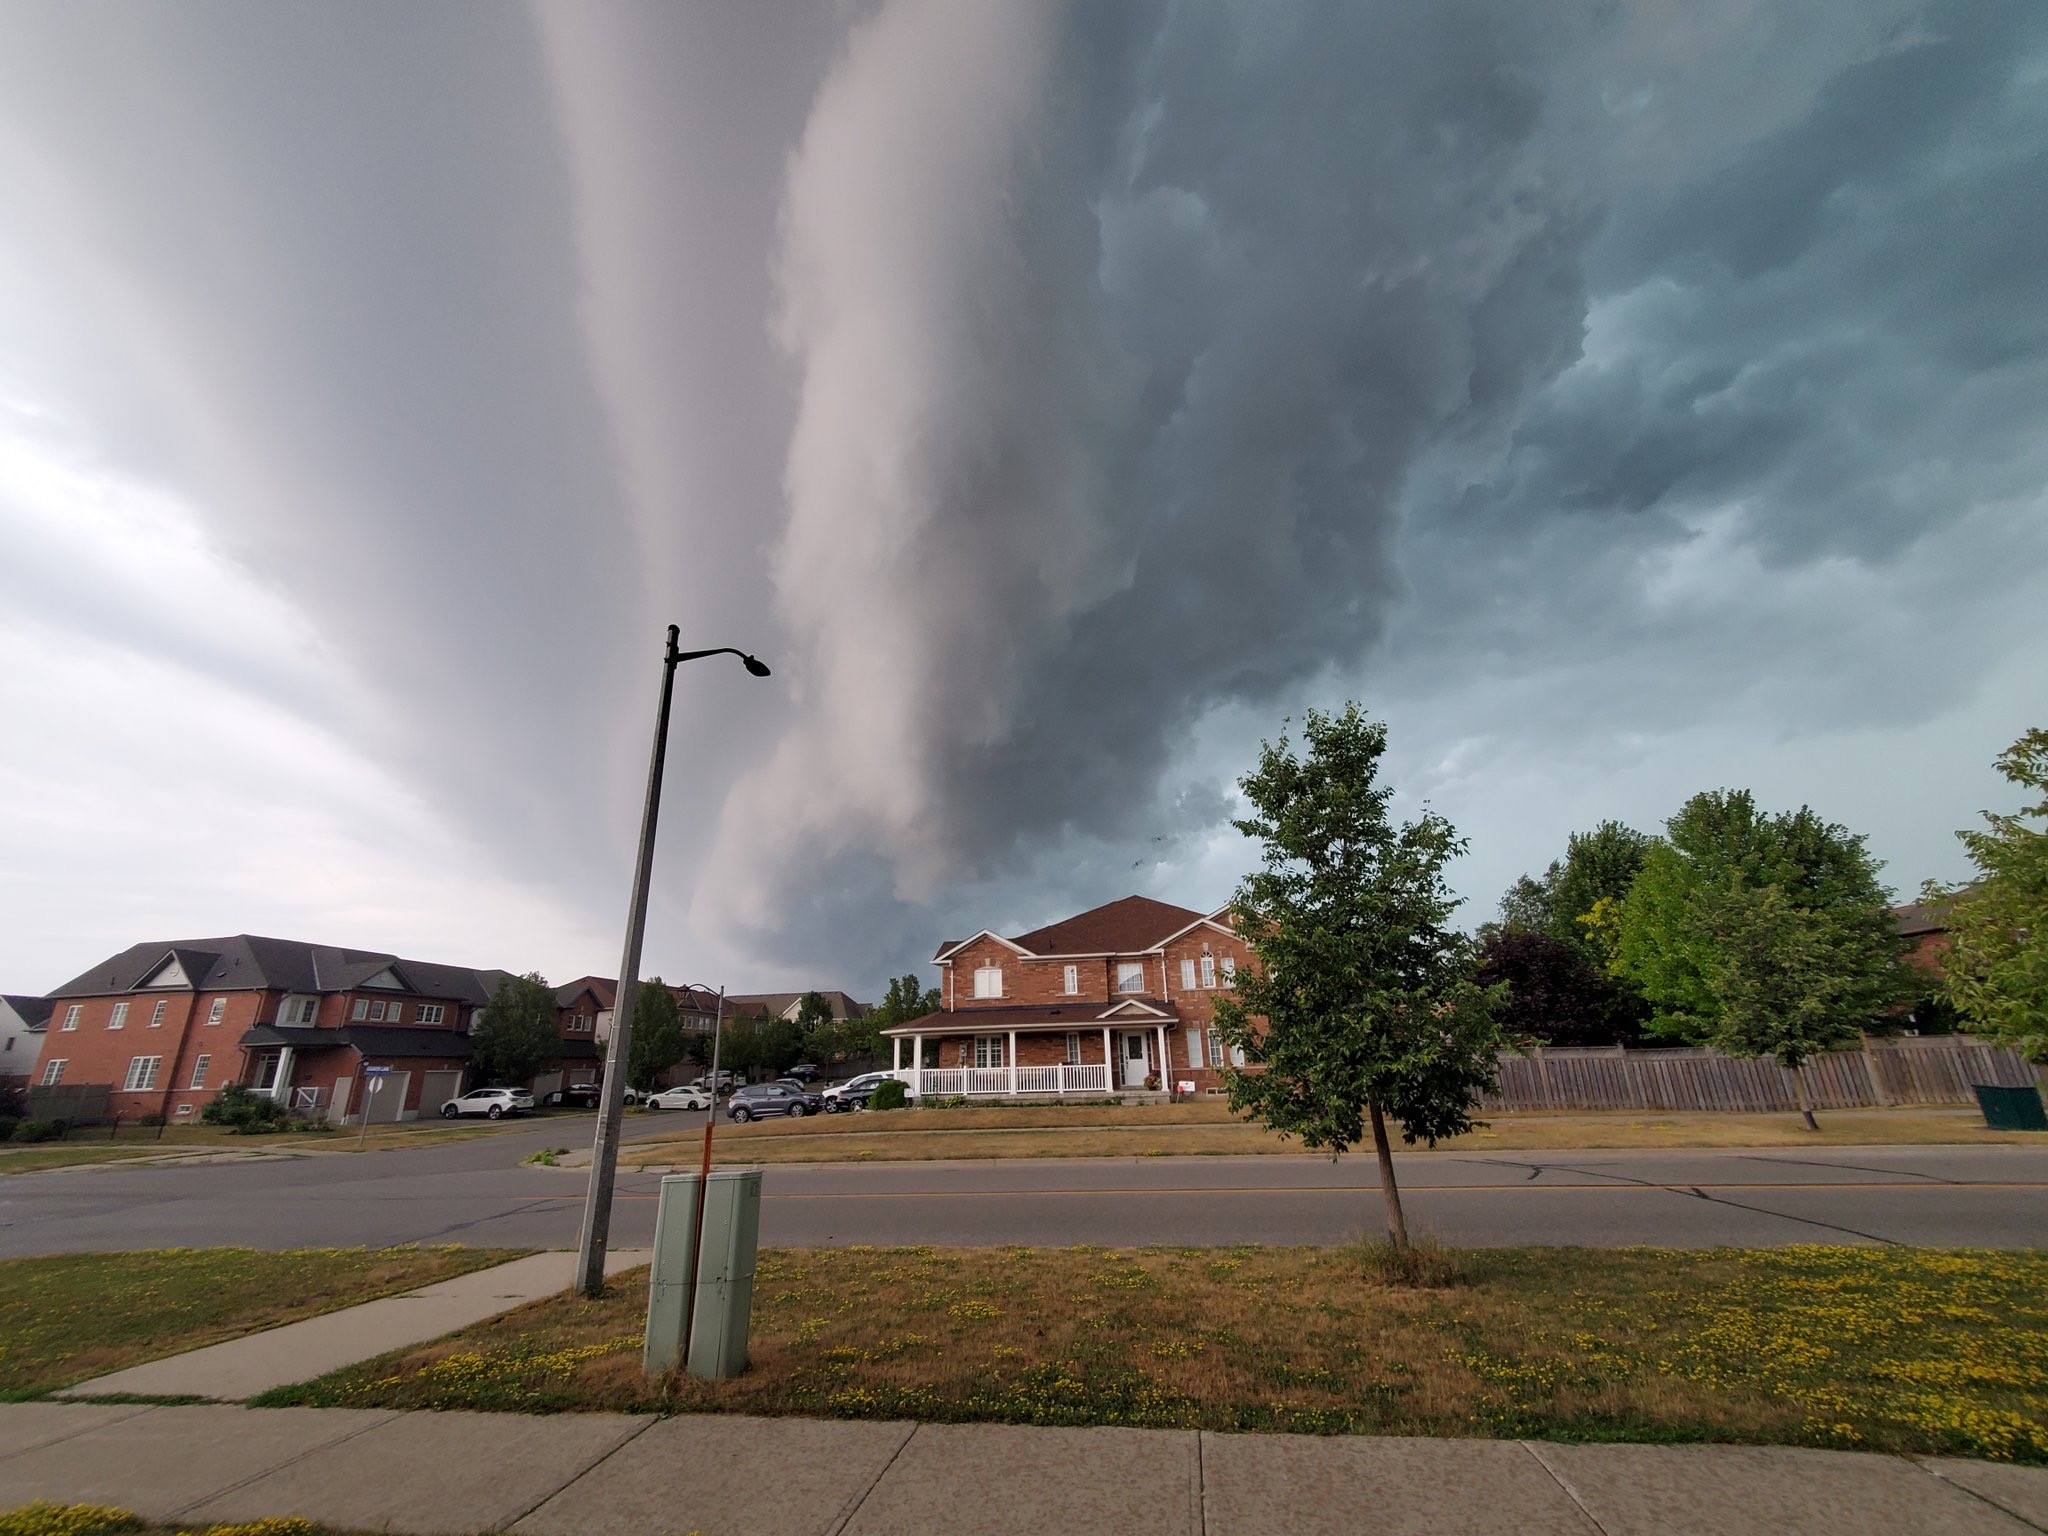 Severe weather prompts Tornado warnings for parts of southern Ontario